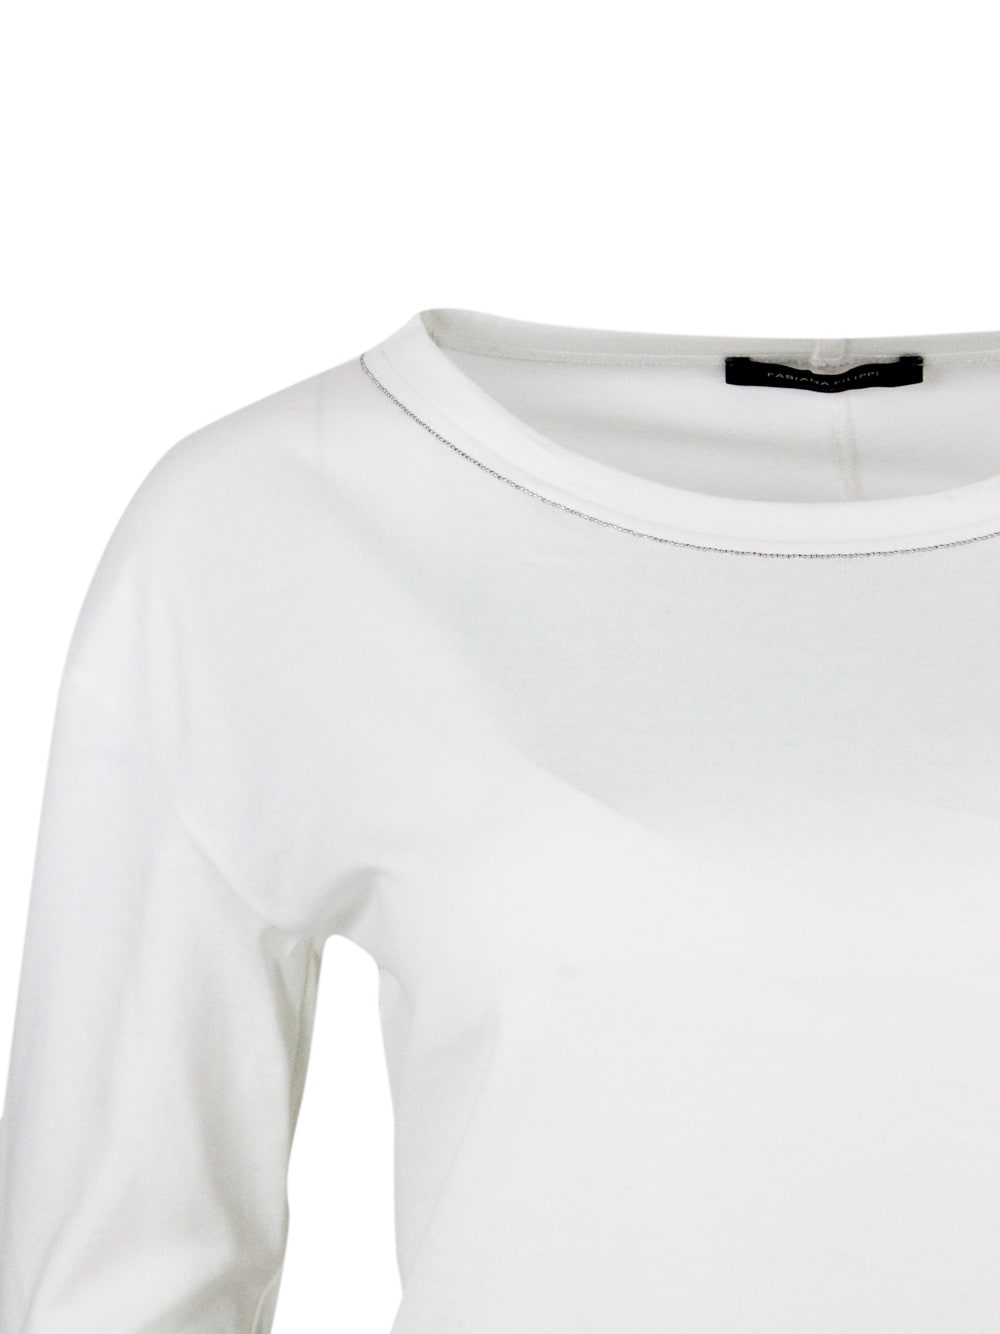 Shop Fabiana Filippi Crew-neck Long-sleeved Cotton Jersey T-shirt Embellished With Rows Of Monili On The Neck In White